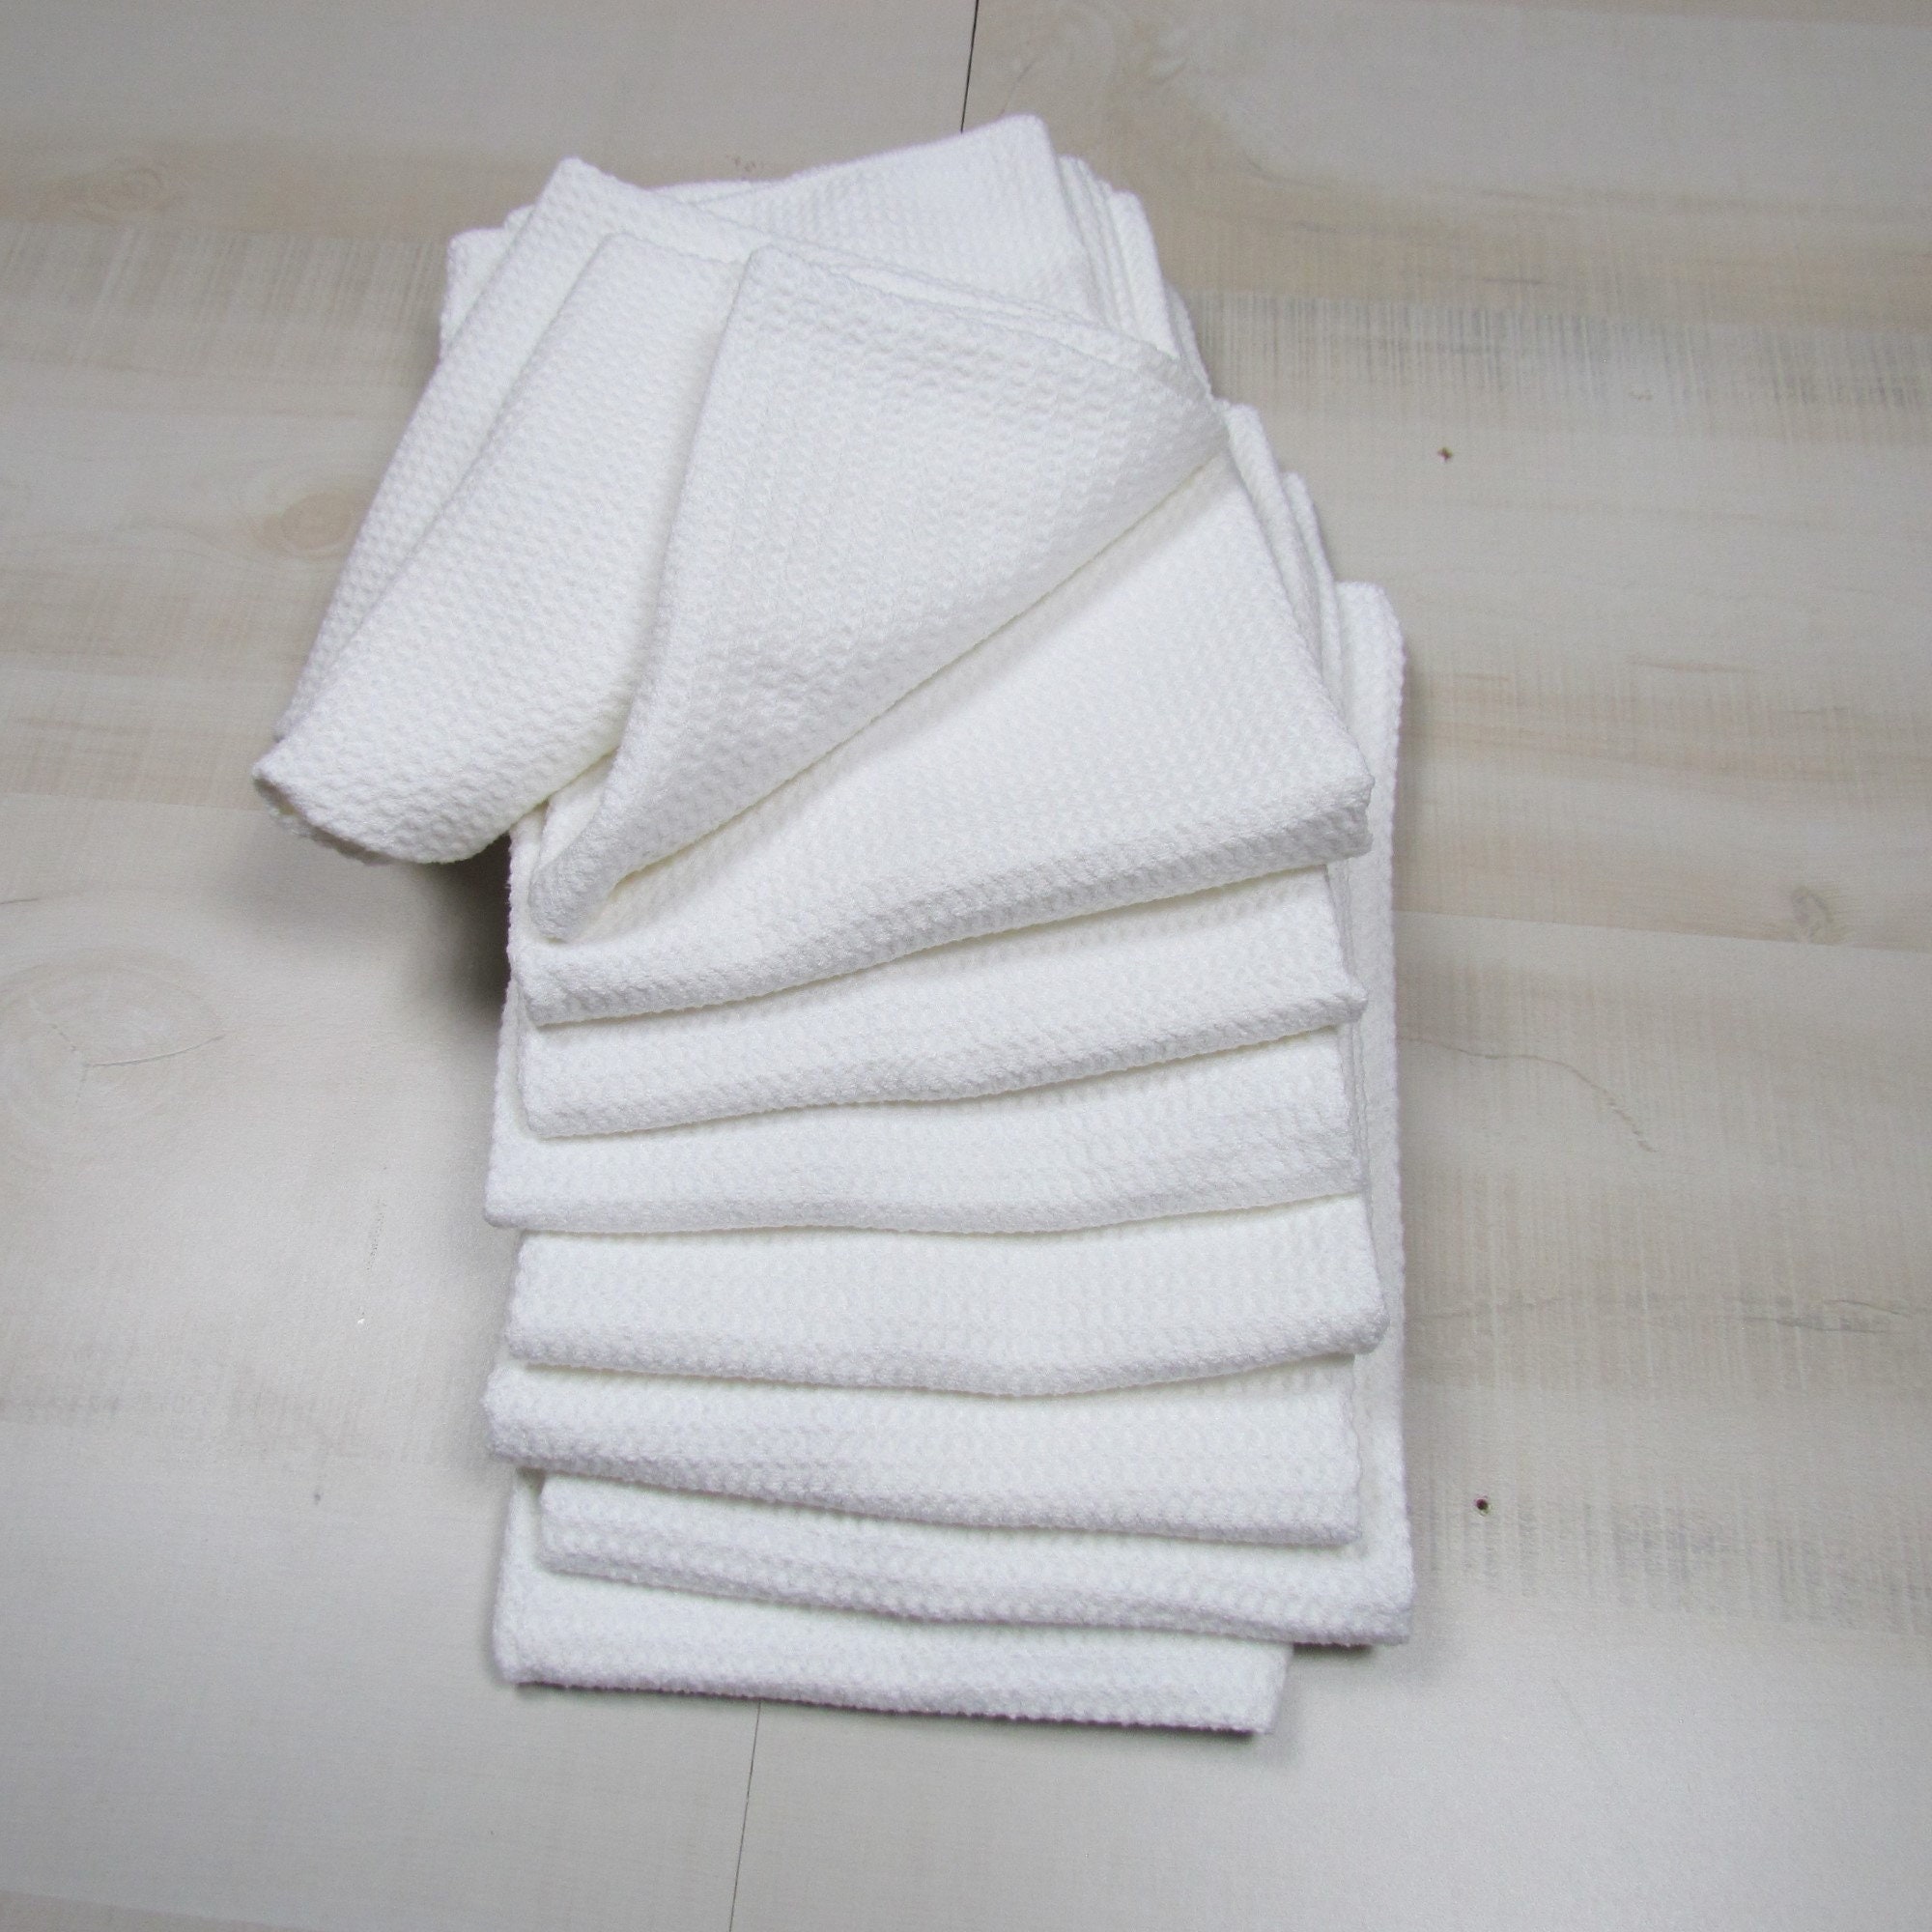 4 Piece Sublimation Embroidery Blanks 100% Polyester Waffle Weave 16 x 24  White Towels Kitchen Bathroom Sports Gym